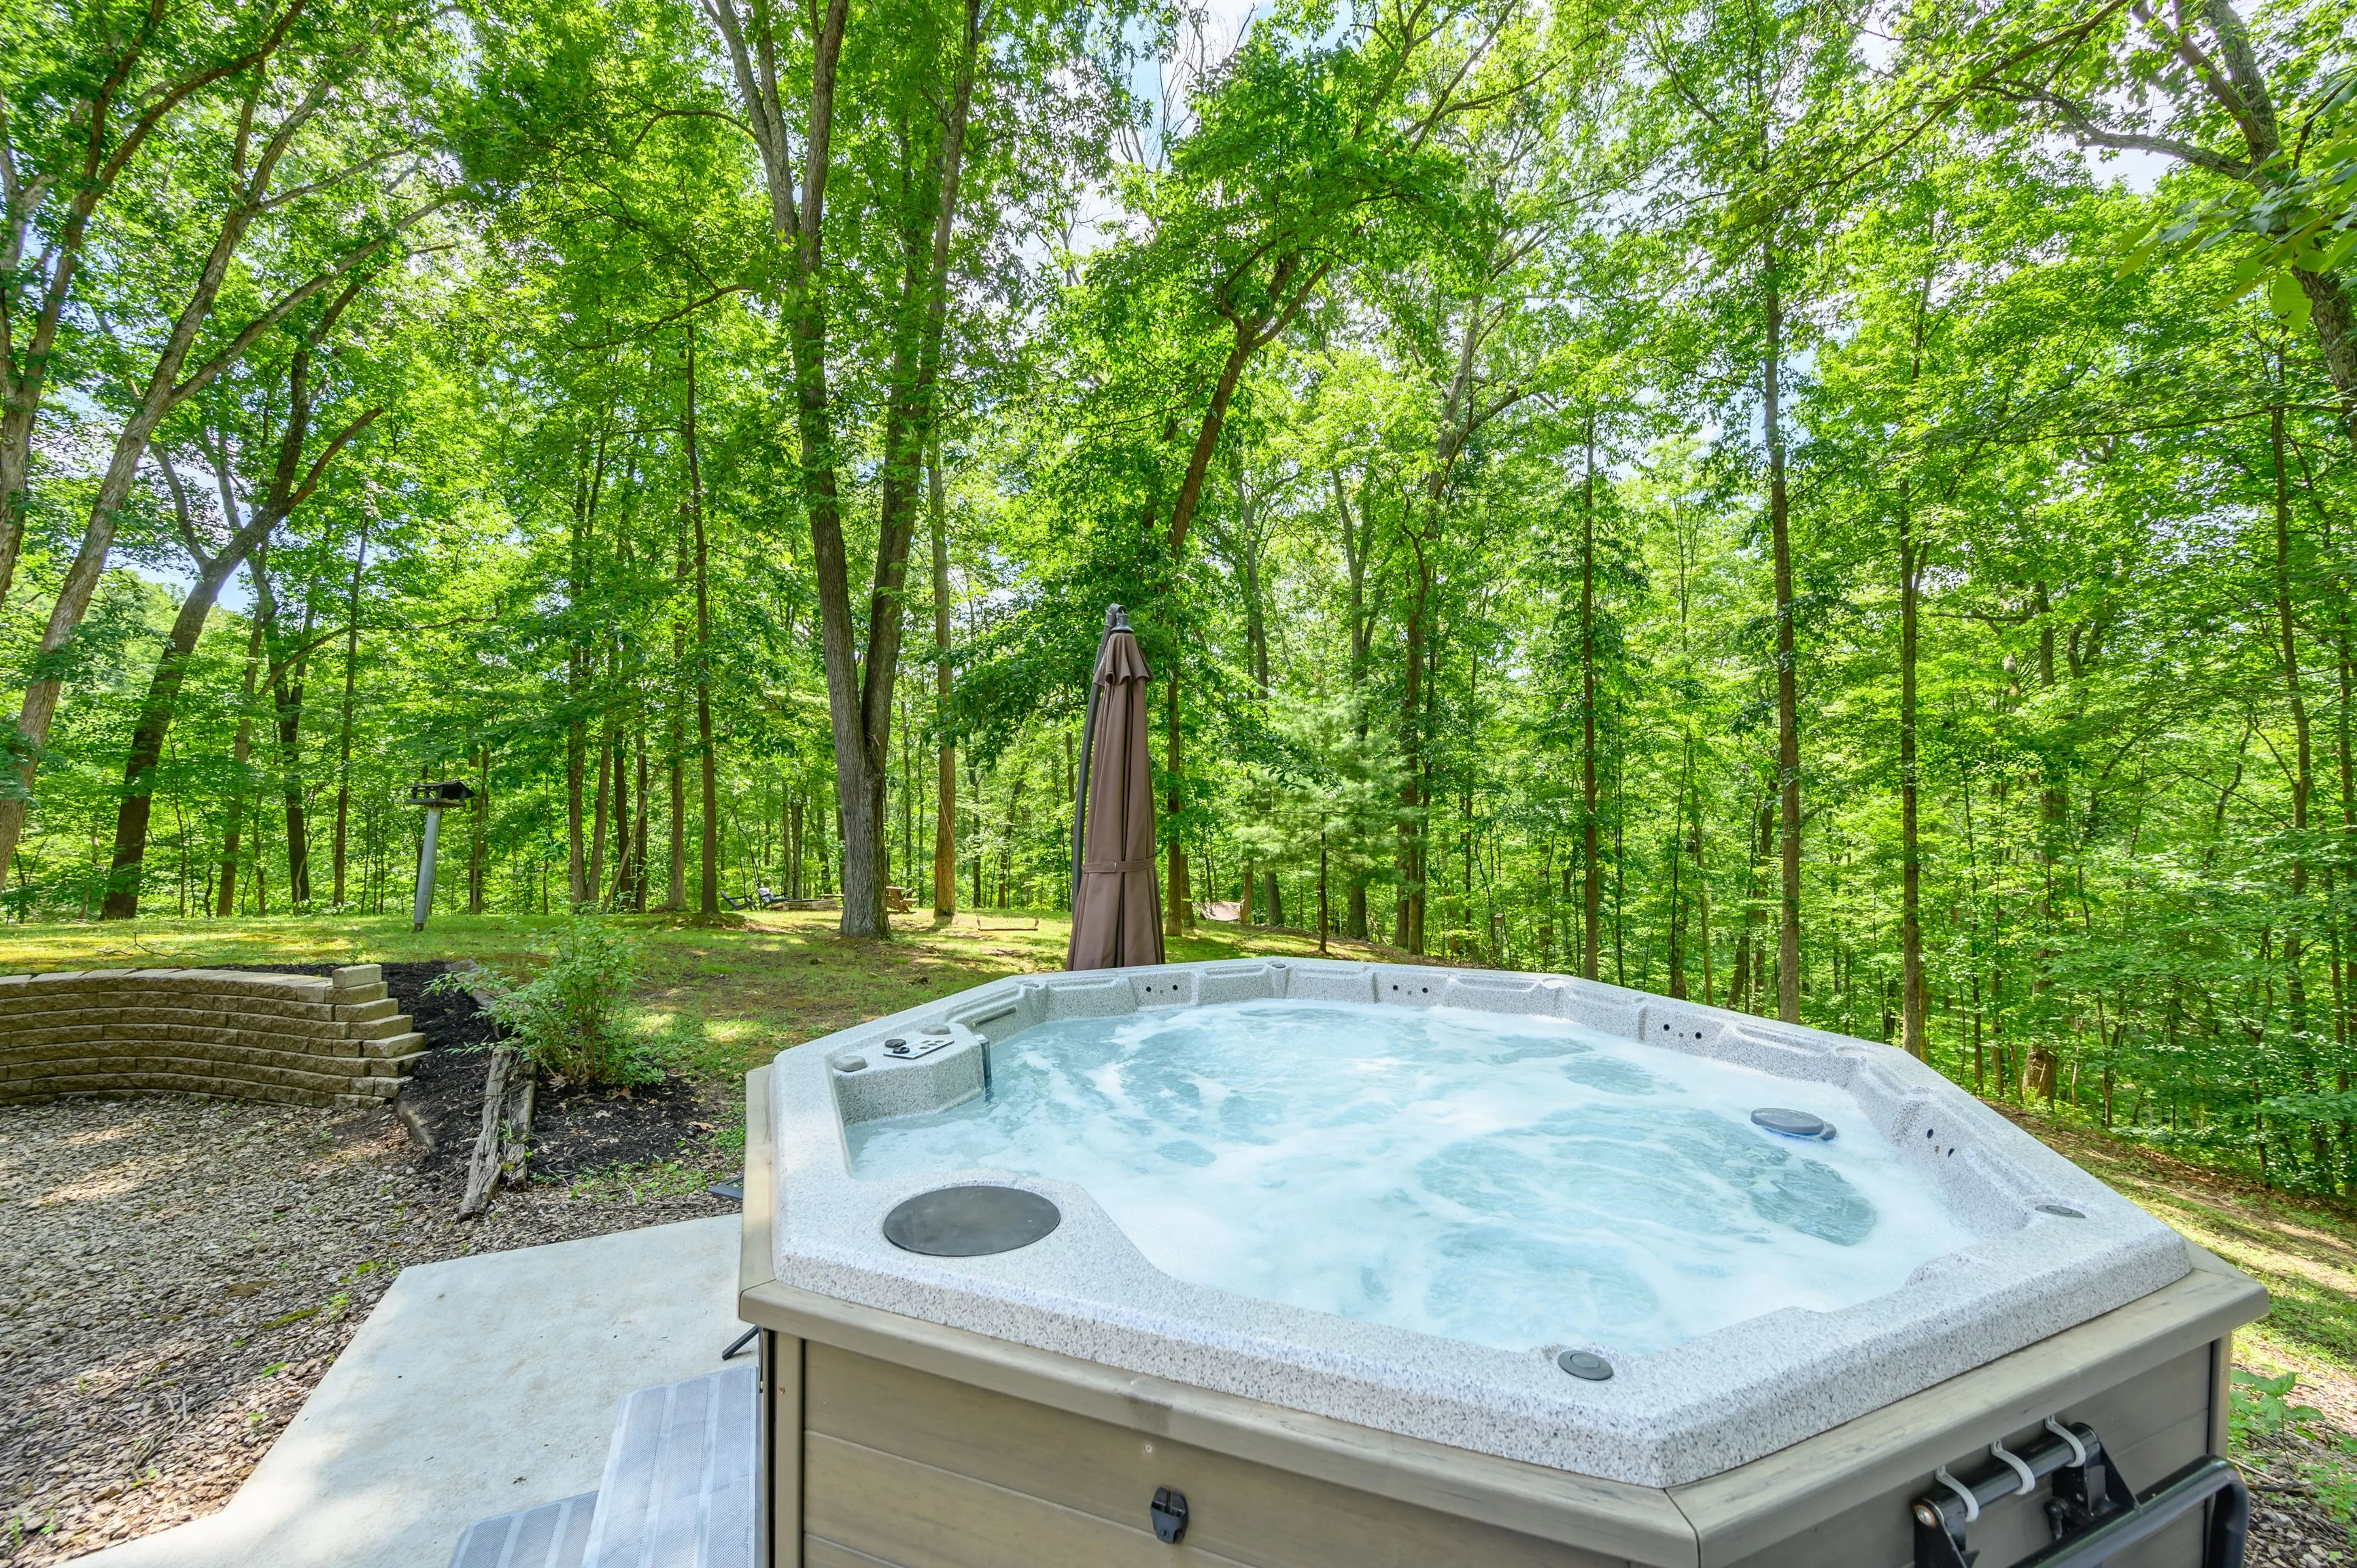 Outdoor hot tub with running water on a concrete patio surrounded by lush green woods.